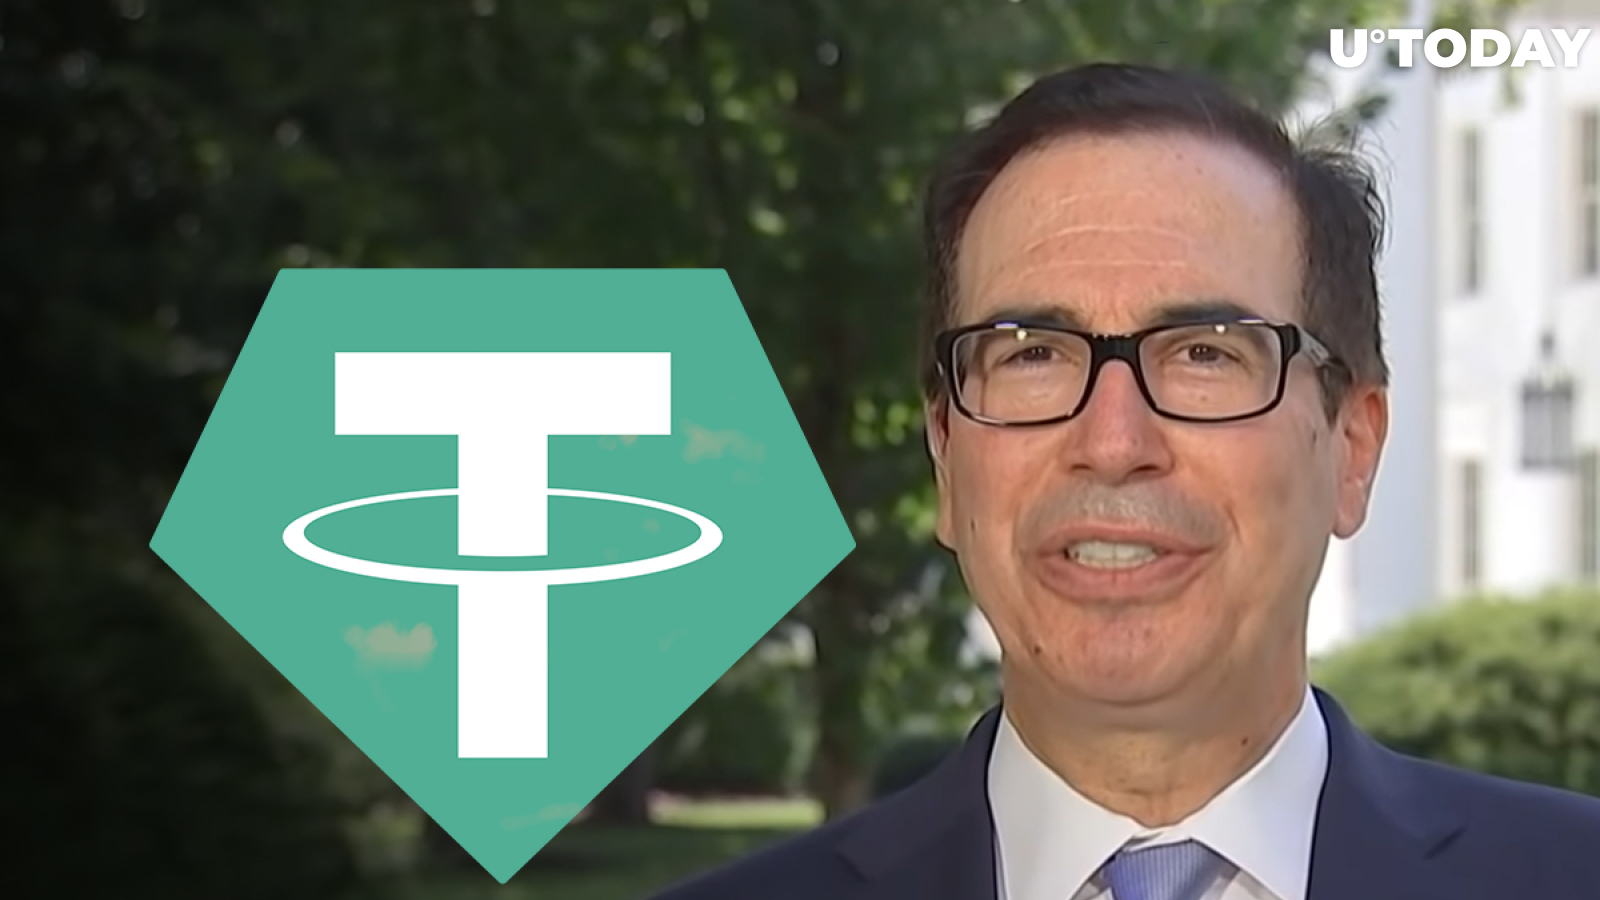 Steve Mnuchin on Tether: Stablecoins Must Be Backed by USD Held in Bank, Not Like Casino Chips 